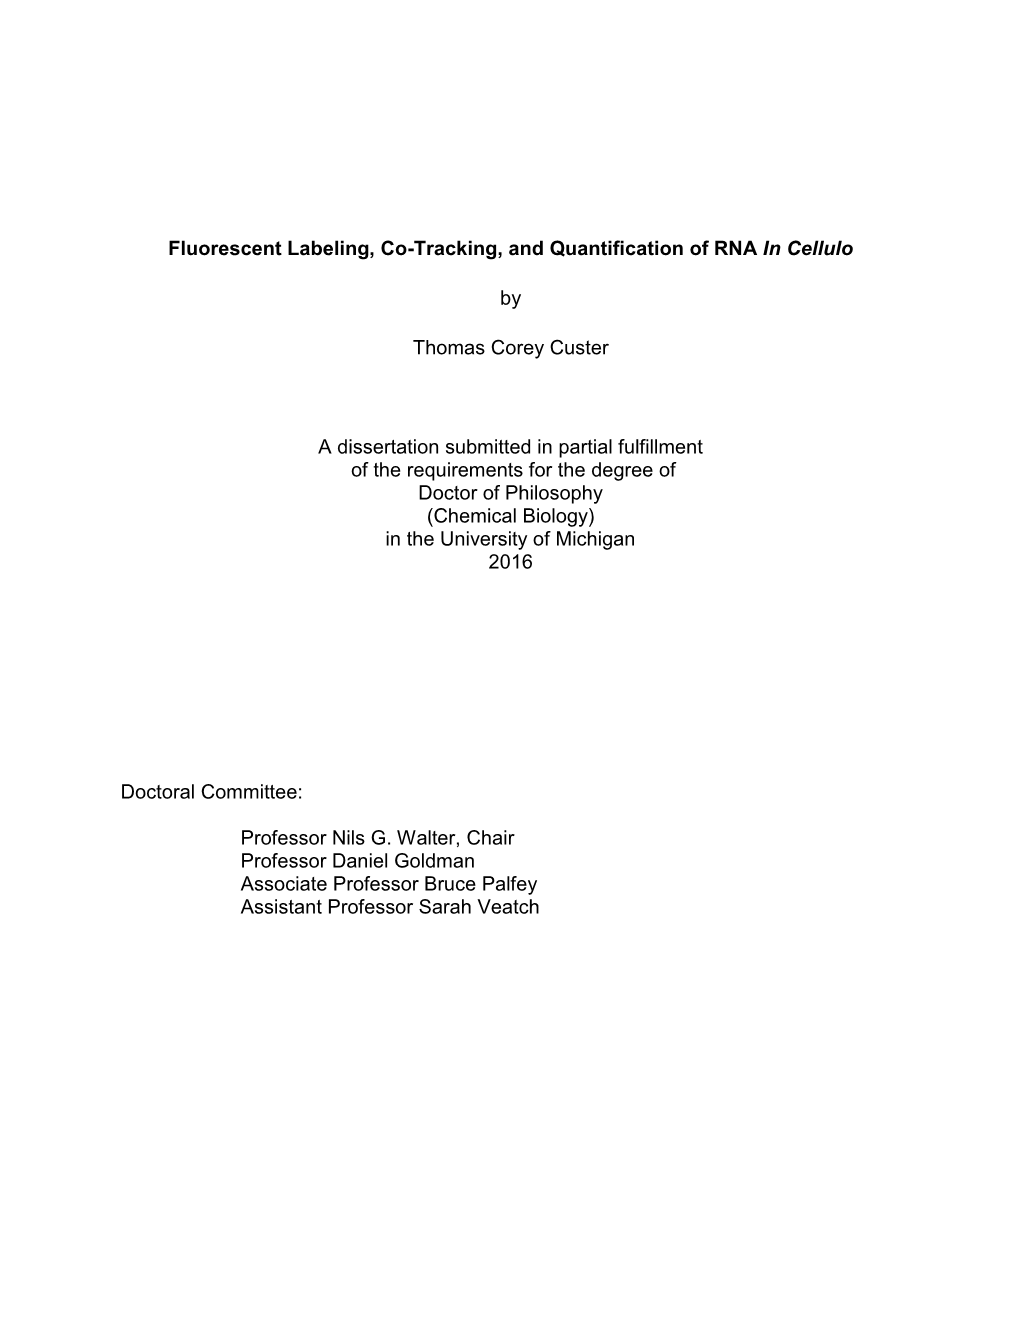 Fluorescent Labeling, Co-Tracking, and Quantification of RNA in Cellulo by Thomas Corey Custer a Dissertation Submitted in Parti